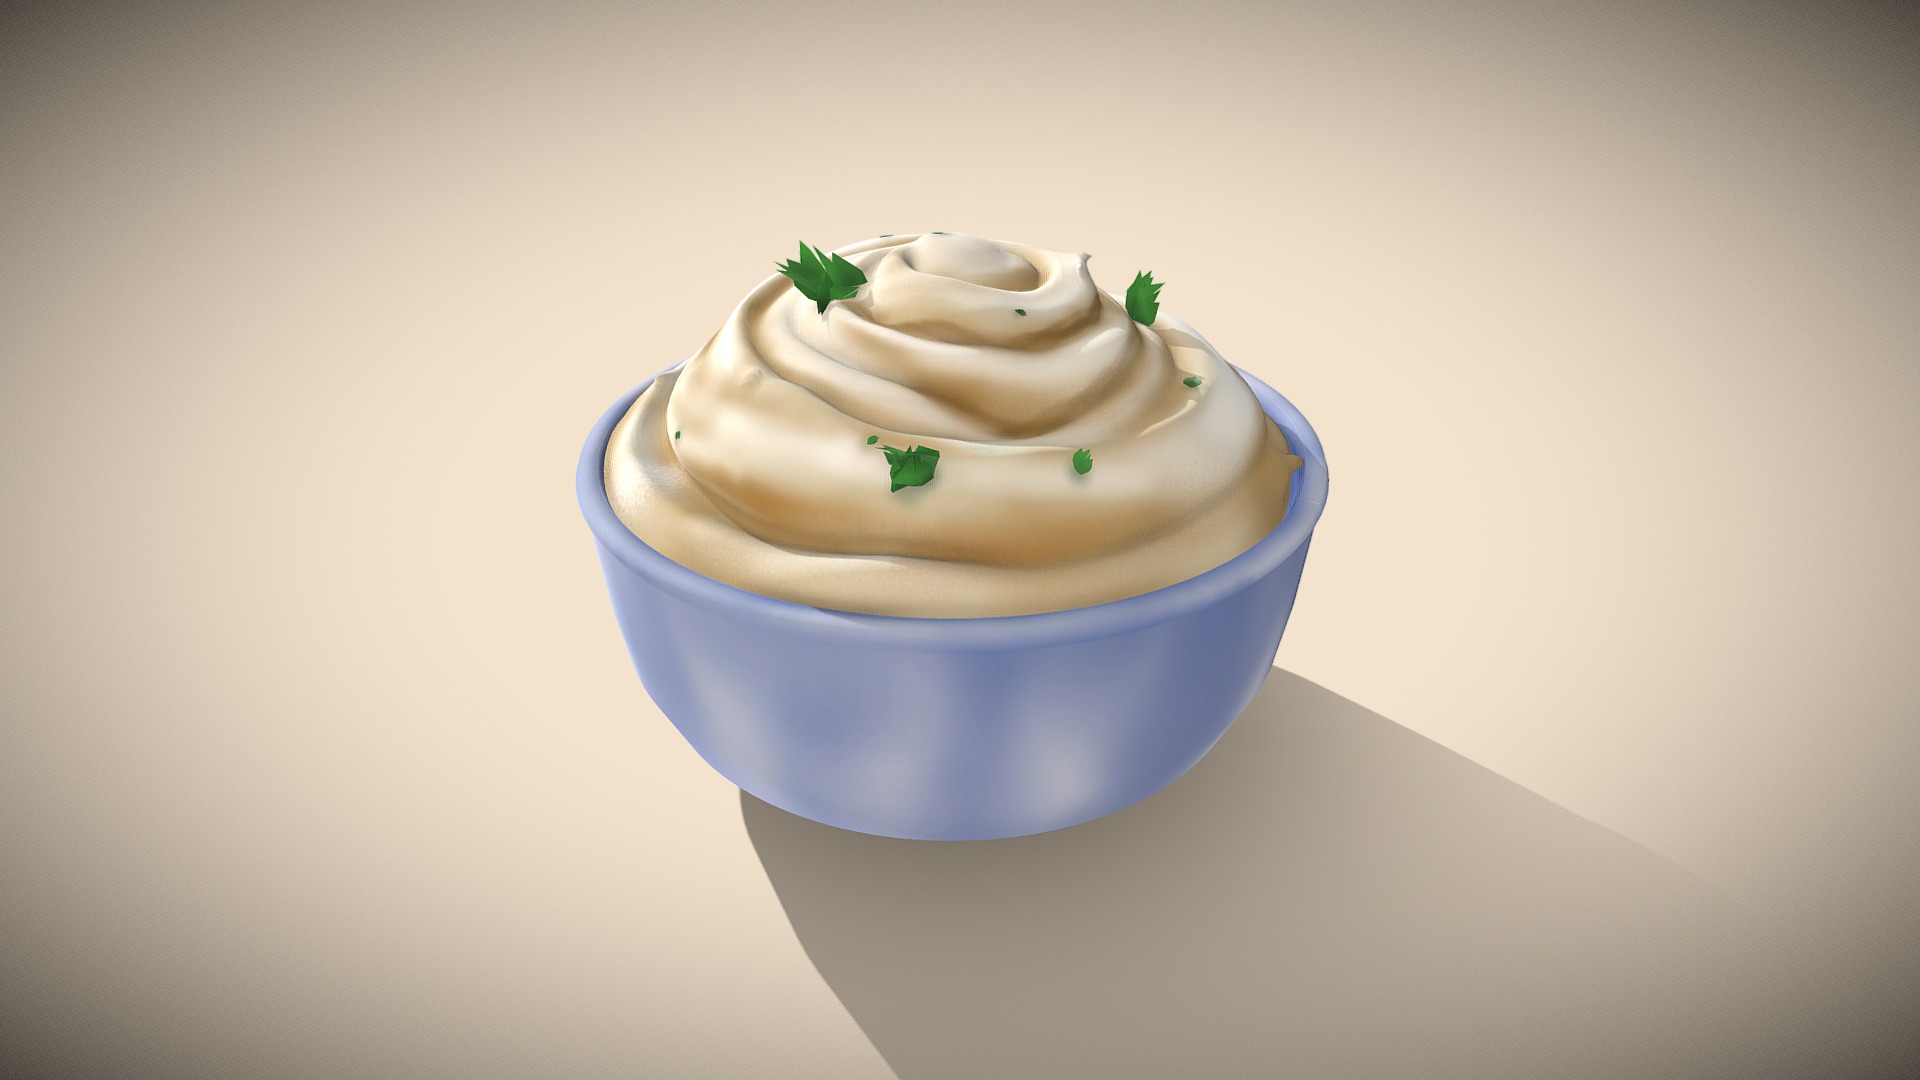 3D model Mashed Potatos - This is a 3D model of the Mashed Potatos. The 3D model is about a cupcake with a white frosting and a green sprinkle.